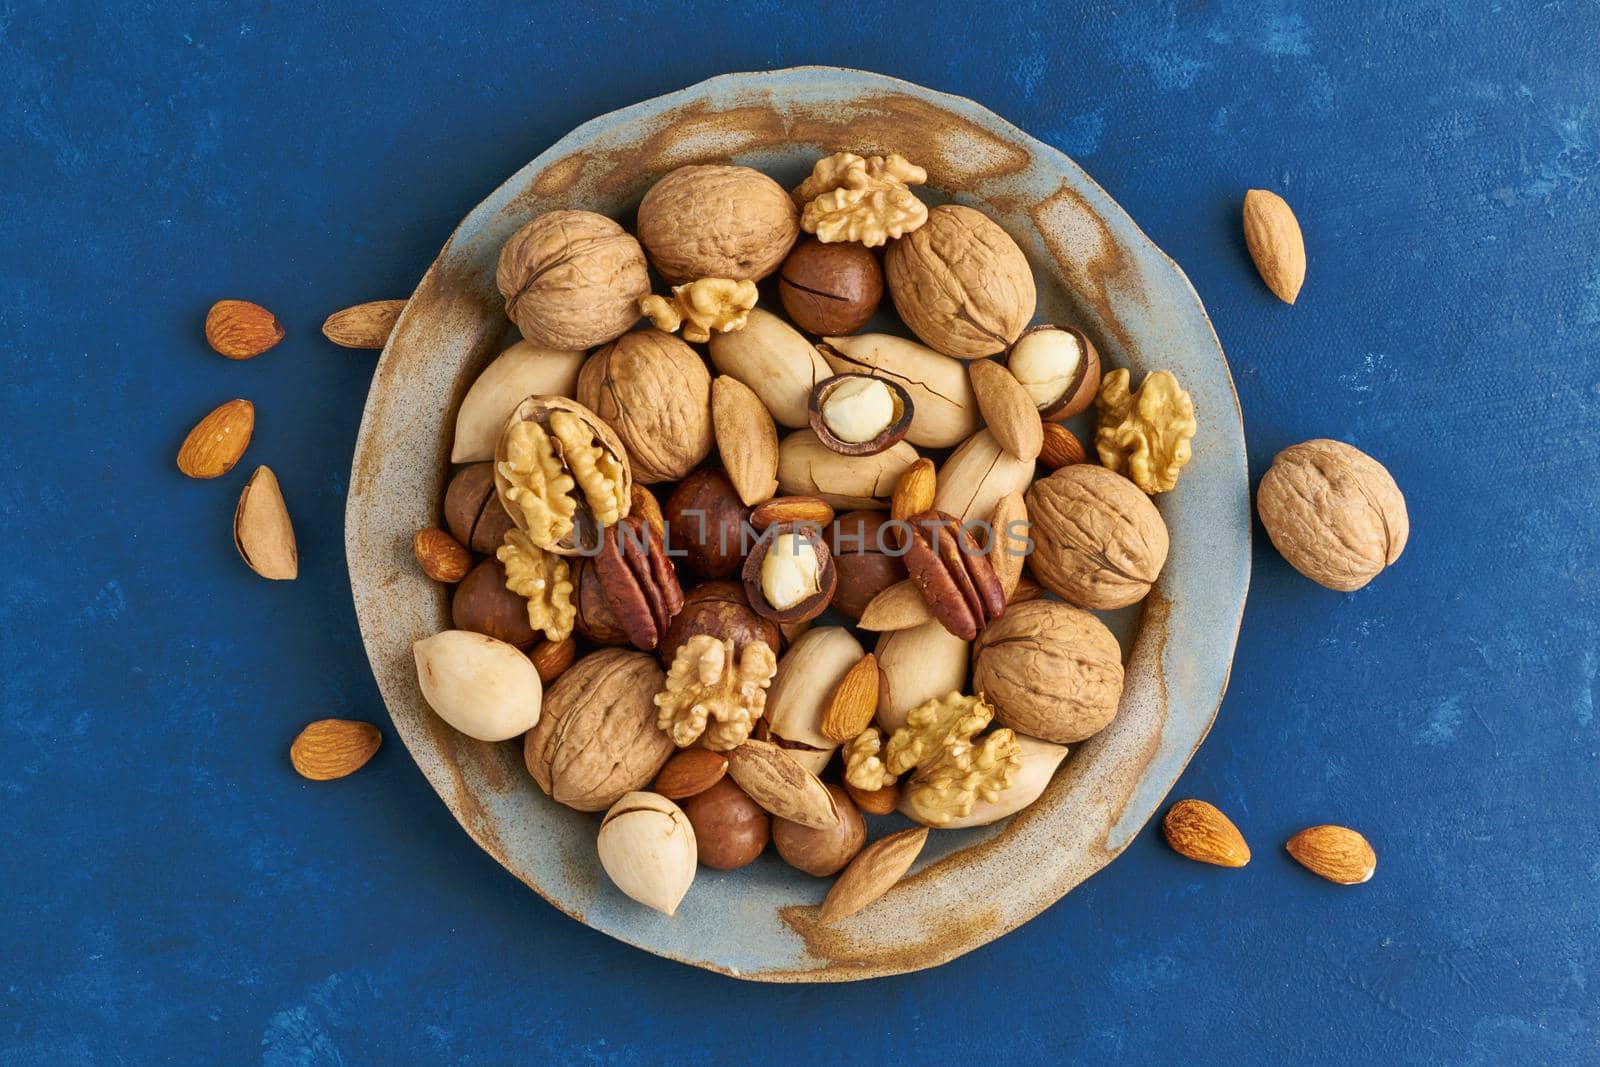 Classic blue in food. Mix of nuts on plate - walnut, almonds, pecans, macadamia and knife for opening shell. Healthy vegan food. Clean eating, balanced diet. Top view by NataBene